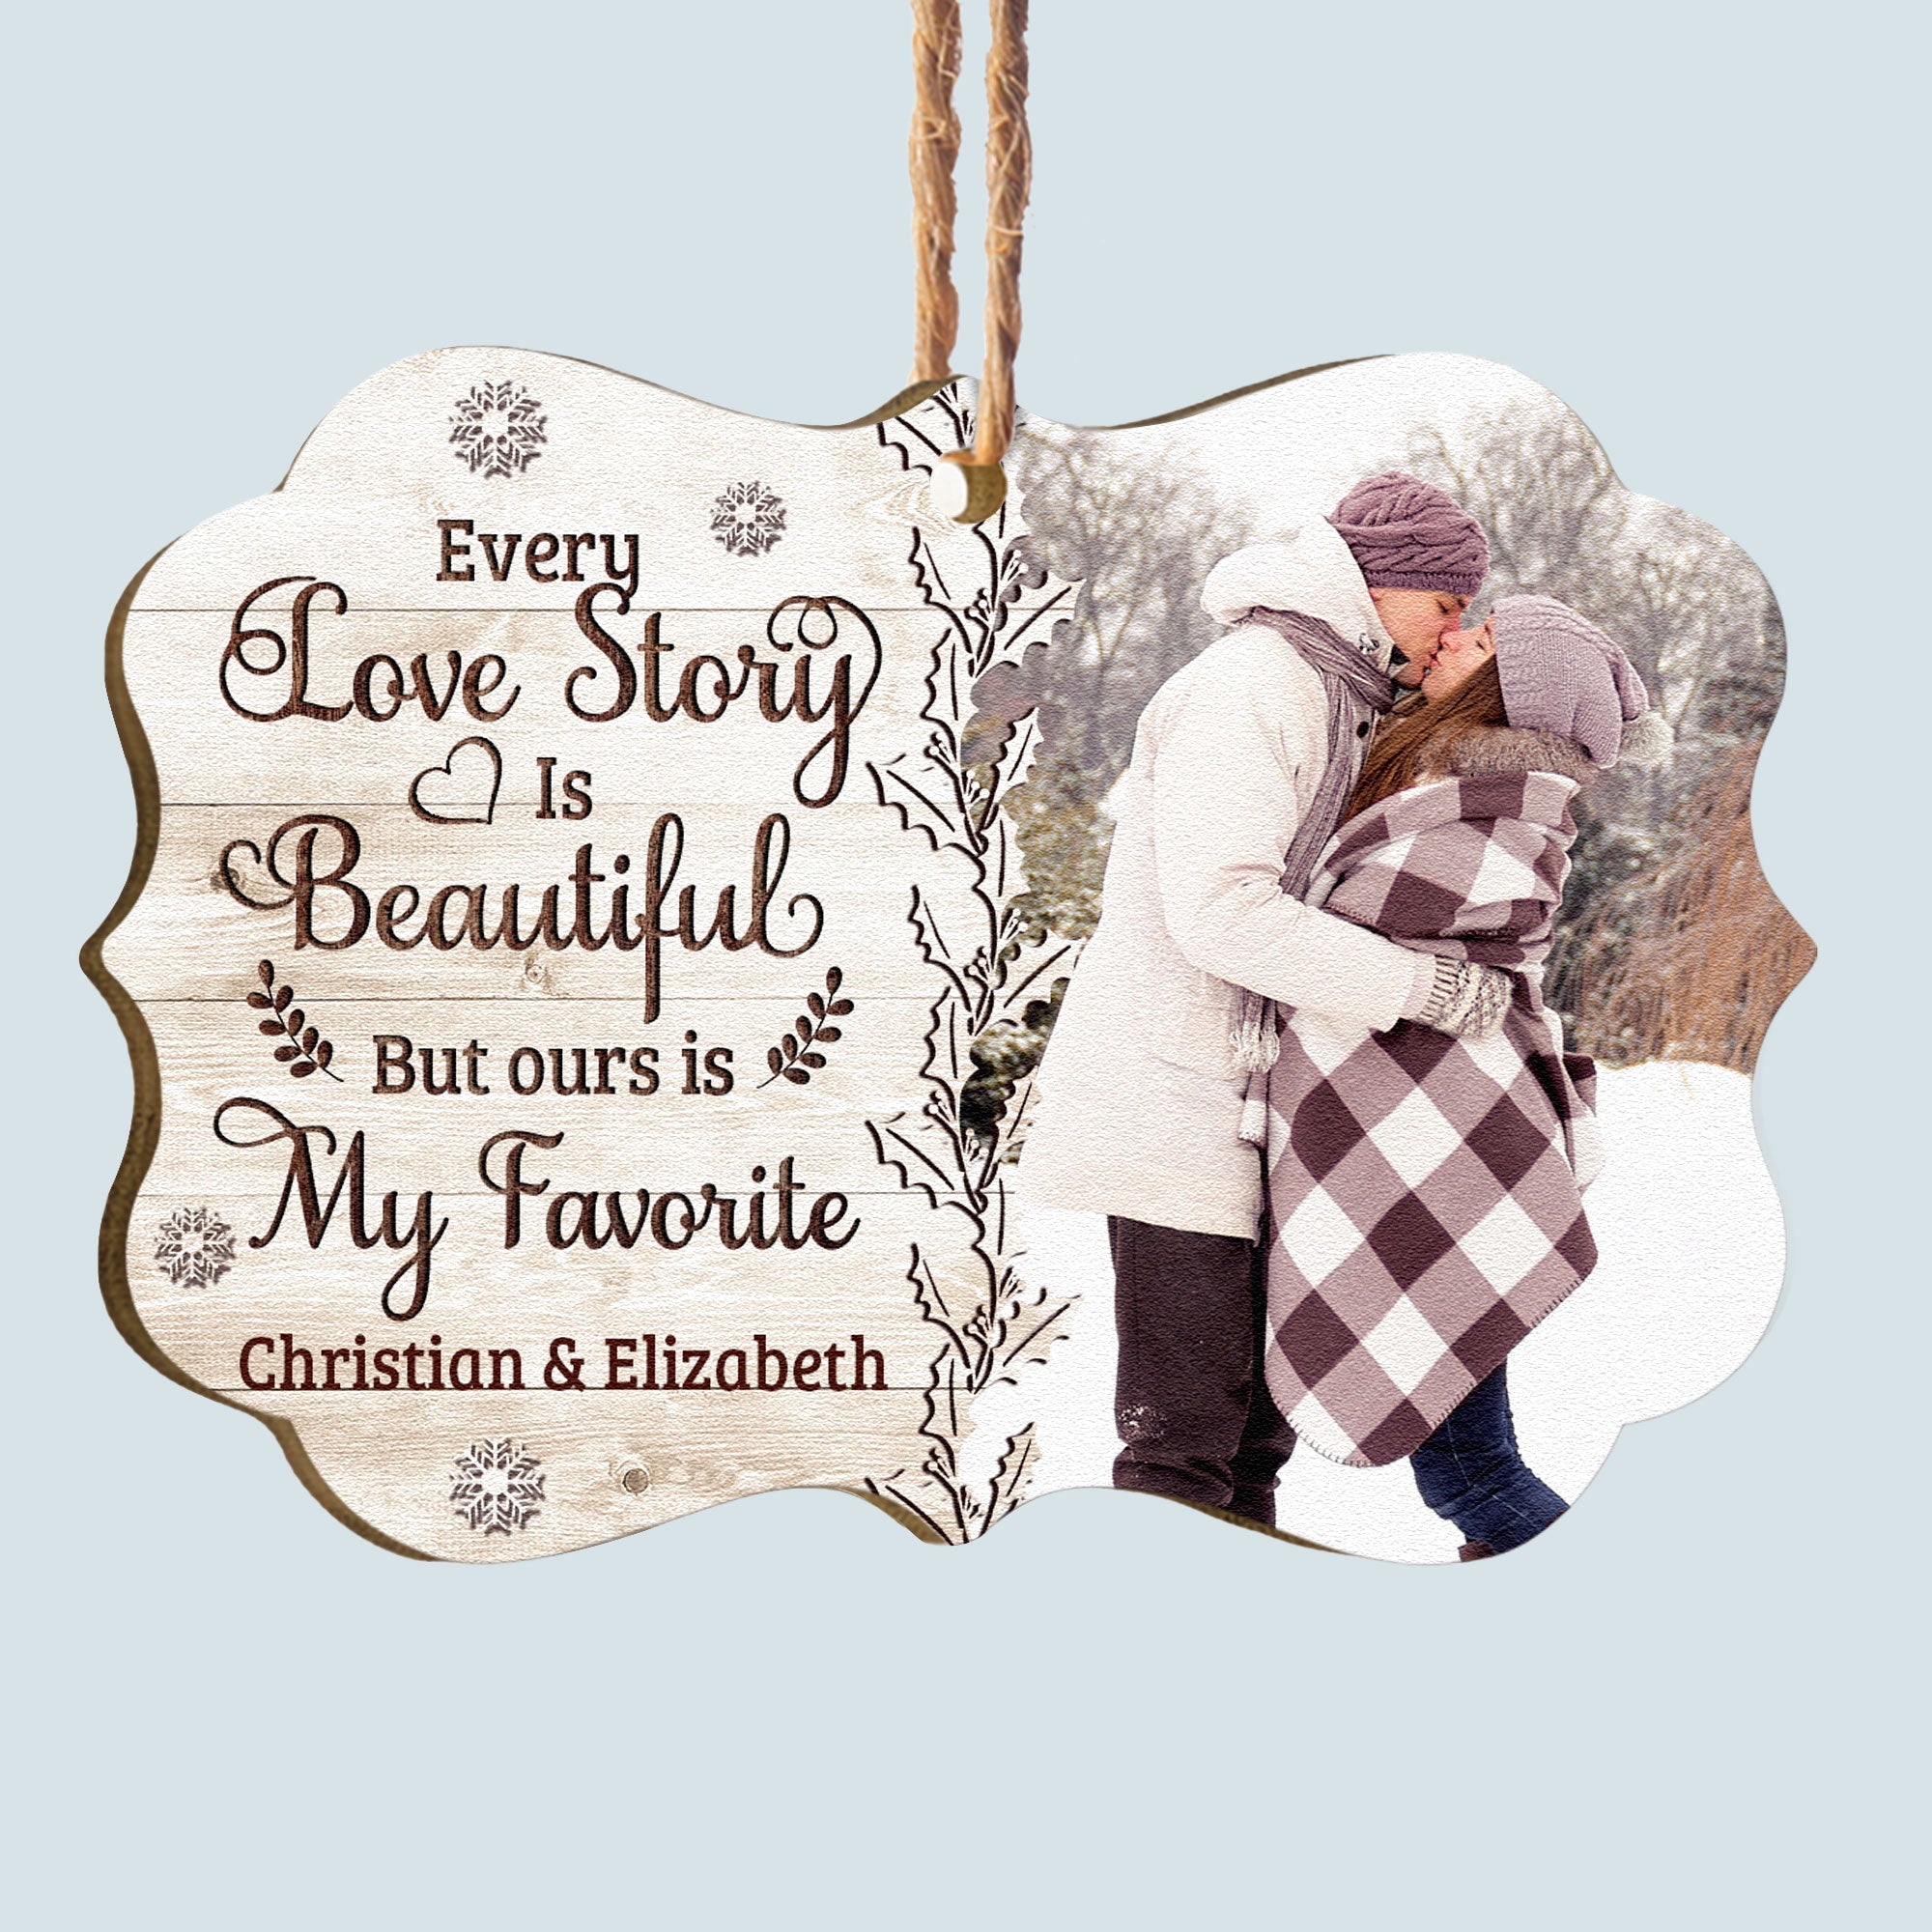 Gift For Dad To Be We Love You Each And Everyday Ornament - Vista